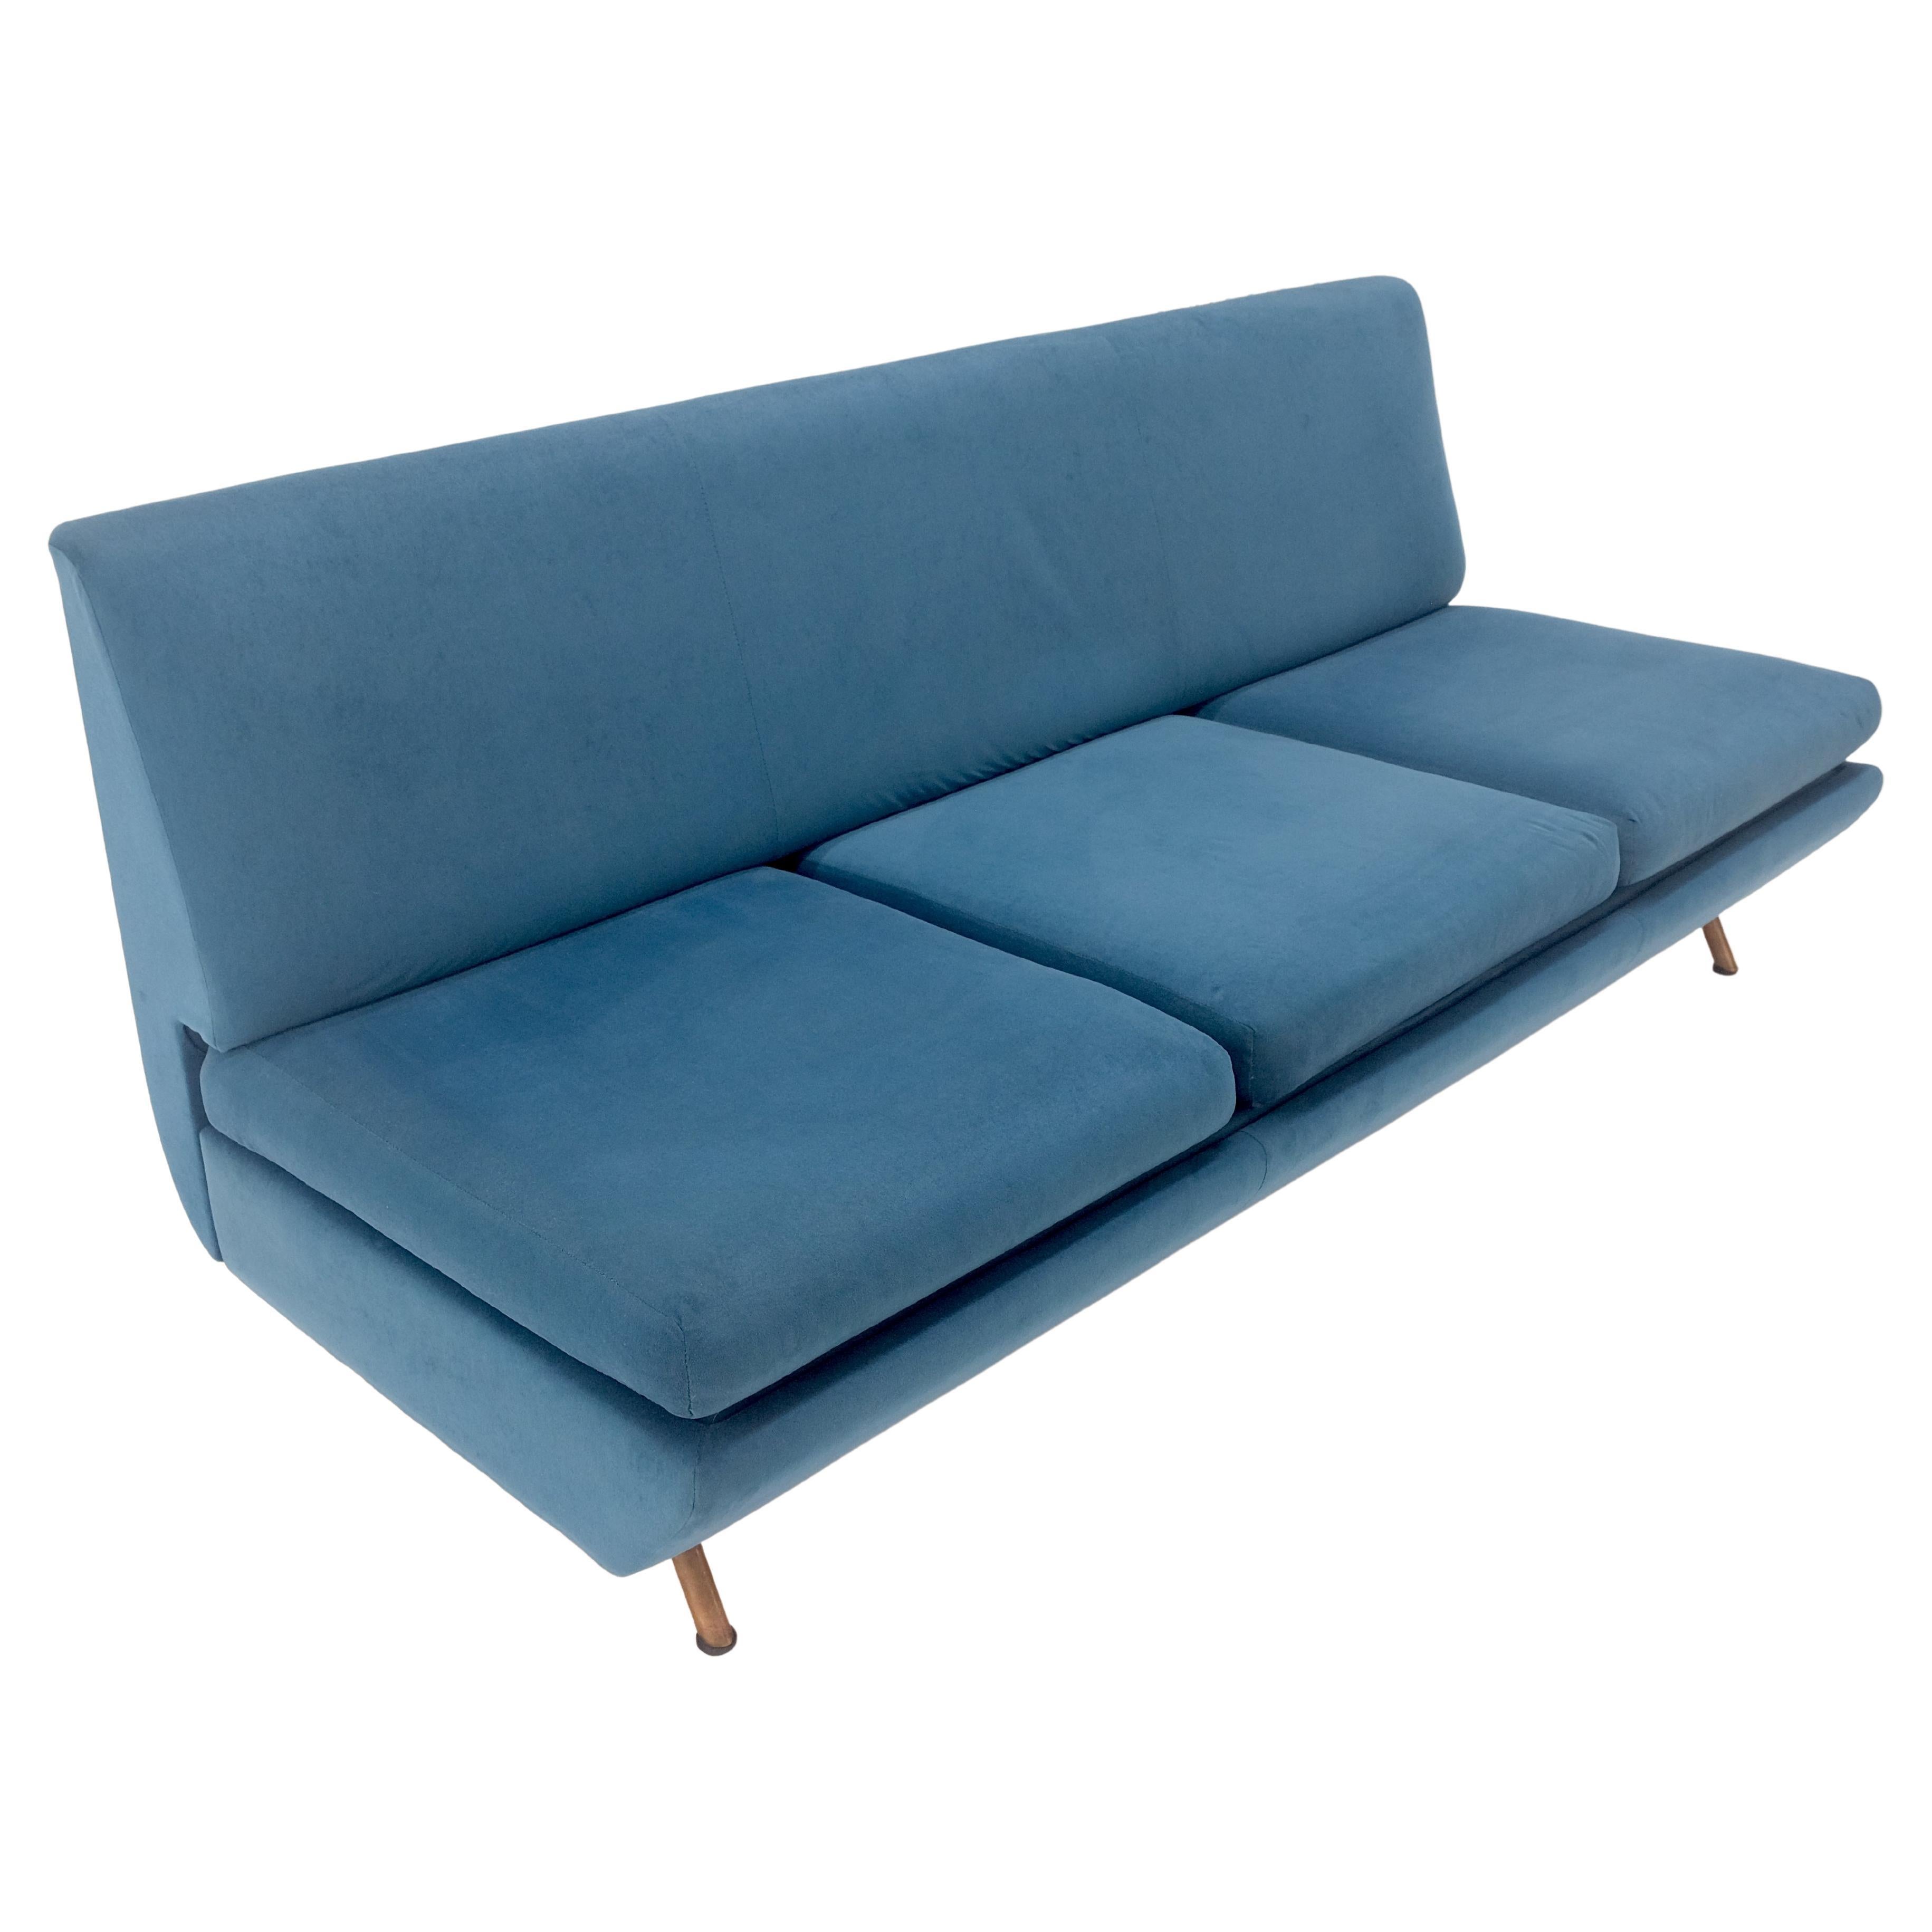 Marco Zanuso Sofa for Arflex Mid Century Italian Modern Teal Upholstery  Clean! For Sale at 1stDibs